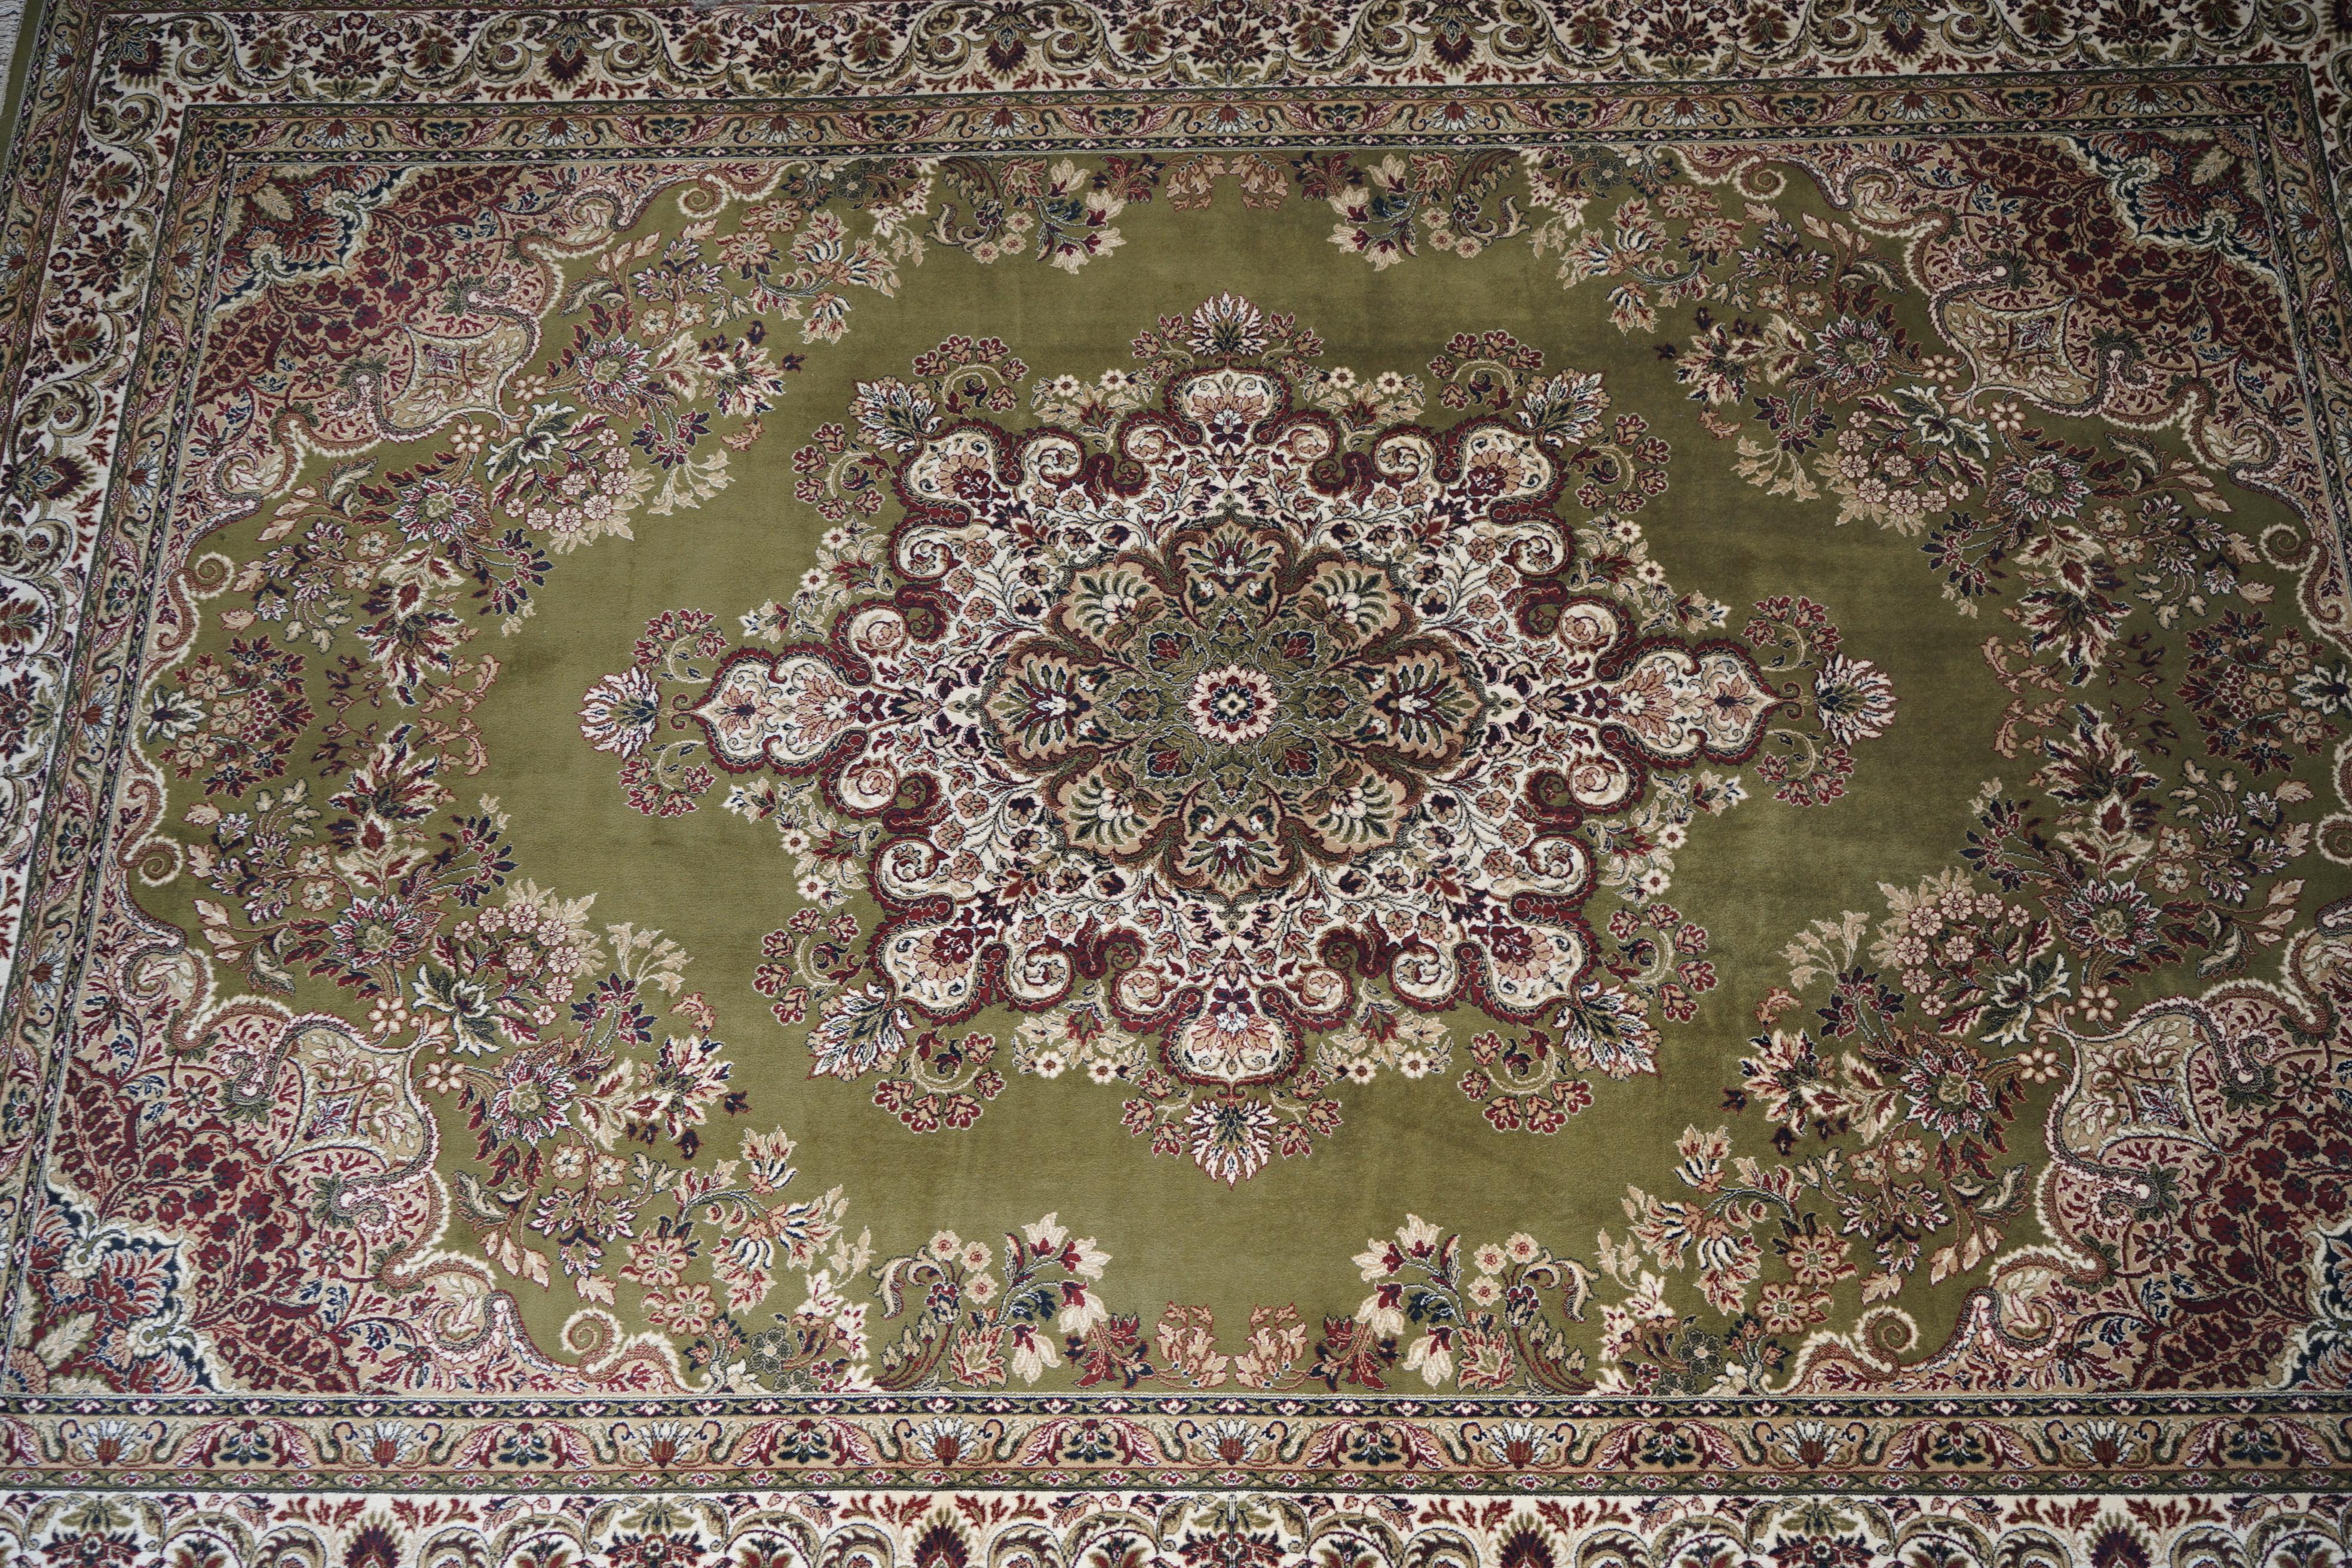 We are delighted to offer for sale this extra large country house, vintage French rug with lovely decoration and rich colours

I have a collection of 12 rugs I’m now listing for sale of all kinds of ages, periods, and sizes, some of them are